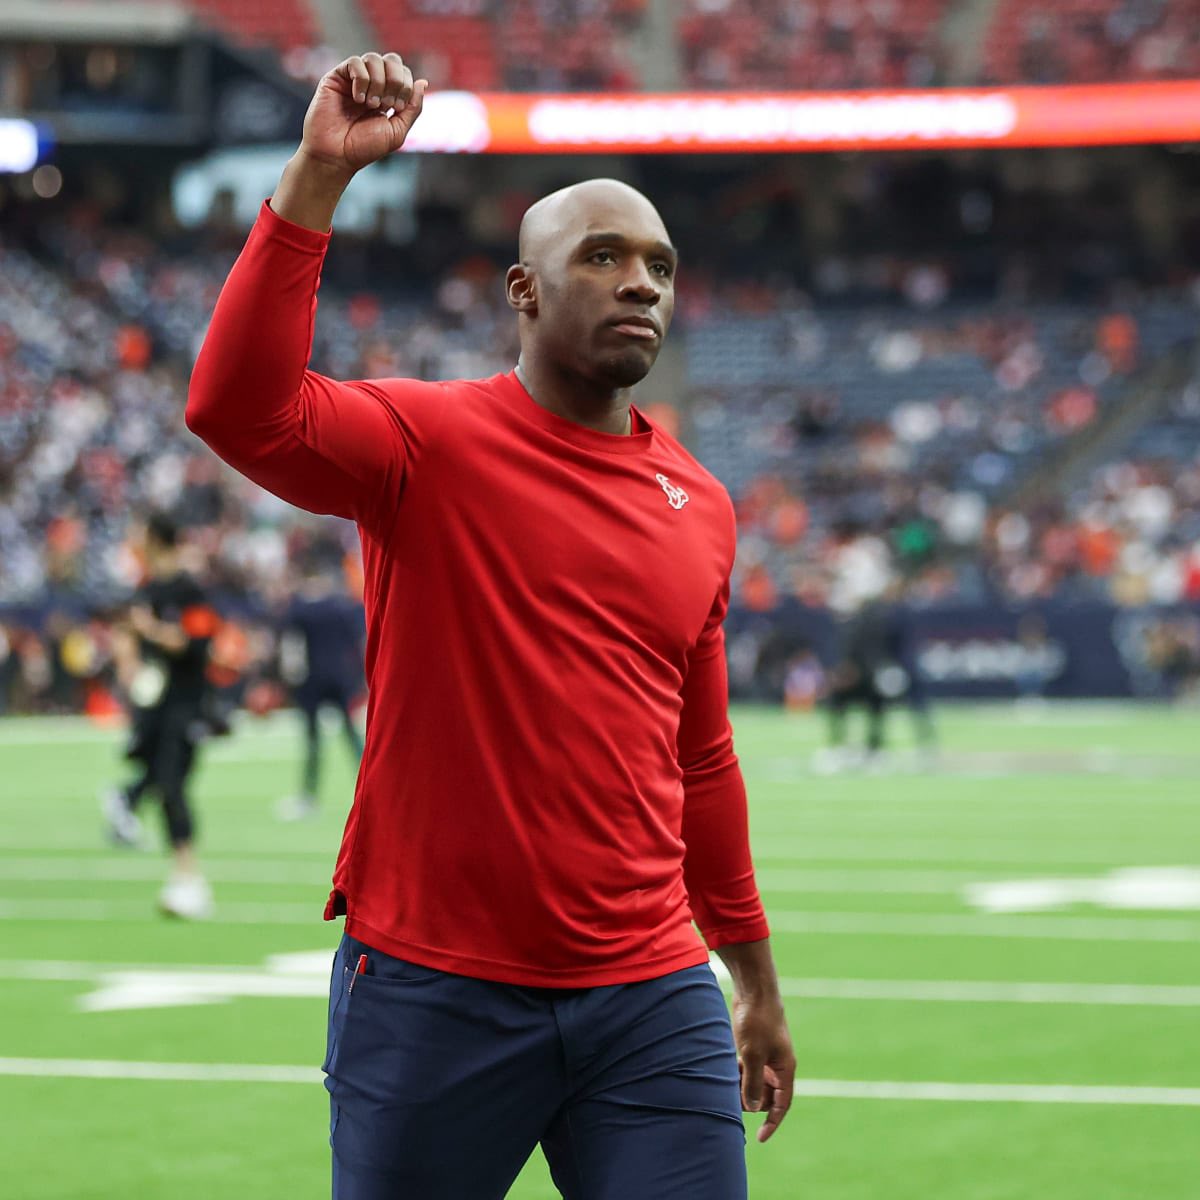 #Texans head coach DeMeco Ryans is building a SPECIAL CULTURE in Houston: “I told the guys, they were going to be treated like men. I don’t want my coaching staff cussing out players or demeaning players cause that isn’t helpful.”